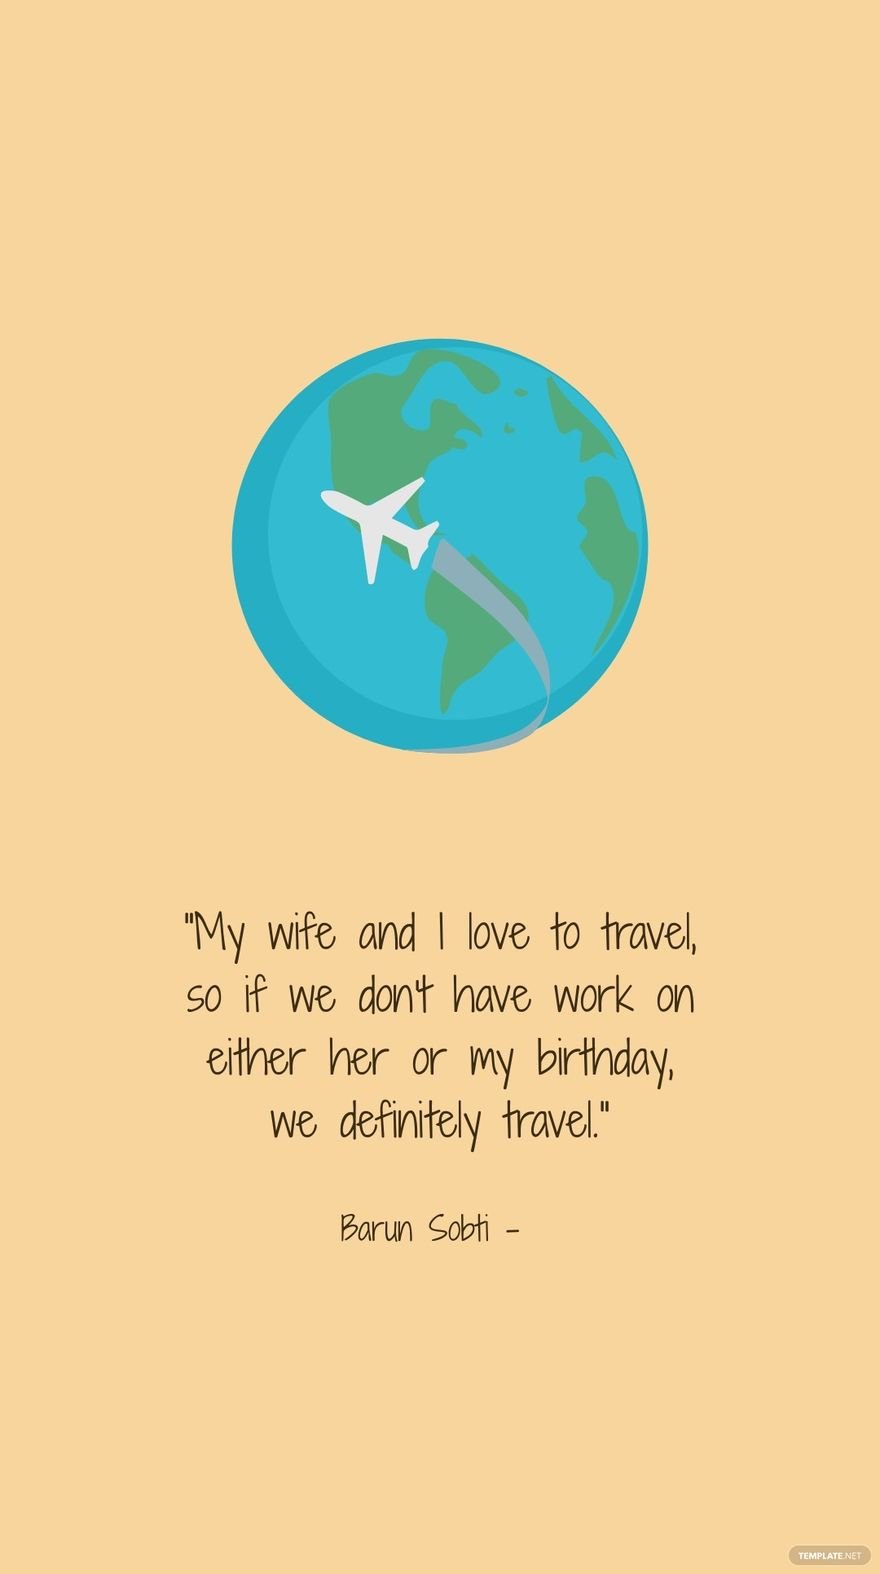 Free Barun Sobti - My wife and I love to travel, so if we don't have work on either her or my birthday, we definitely travel. in JPG